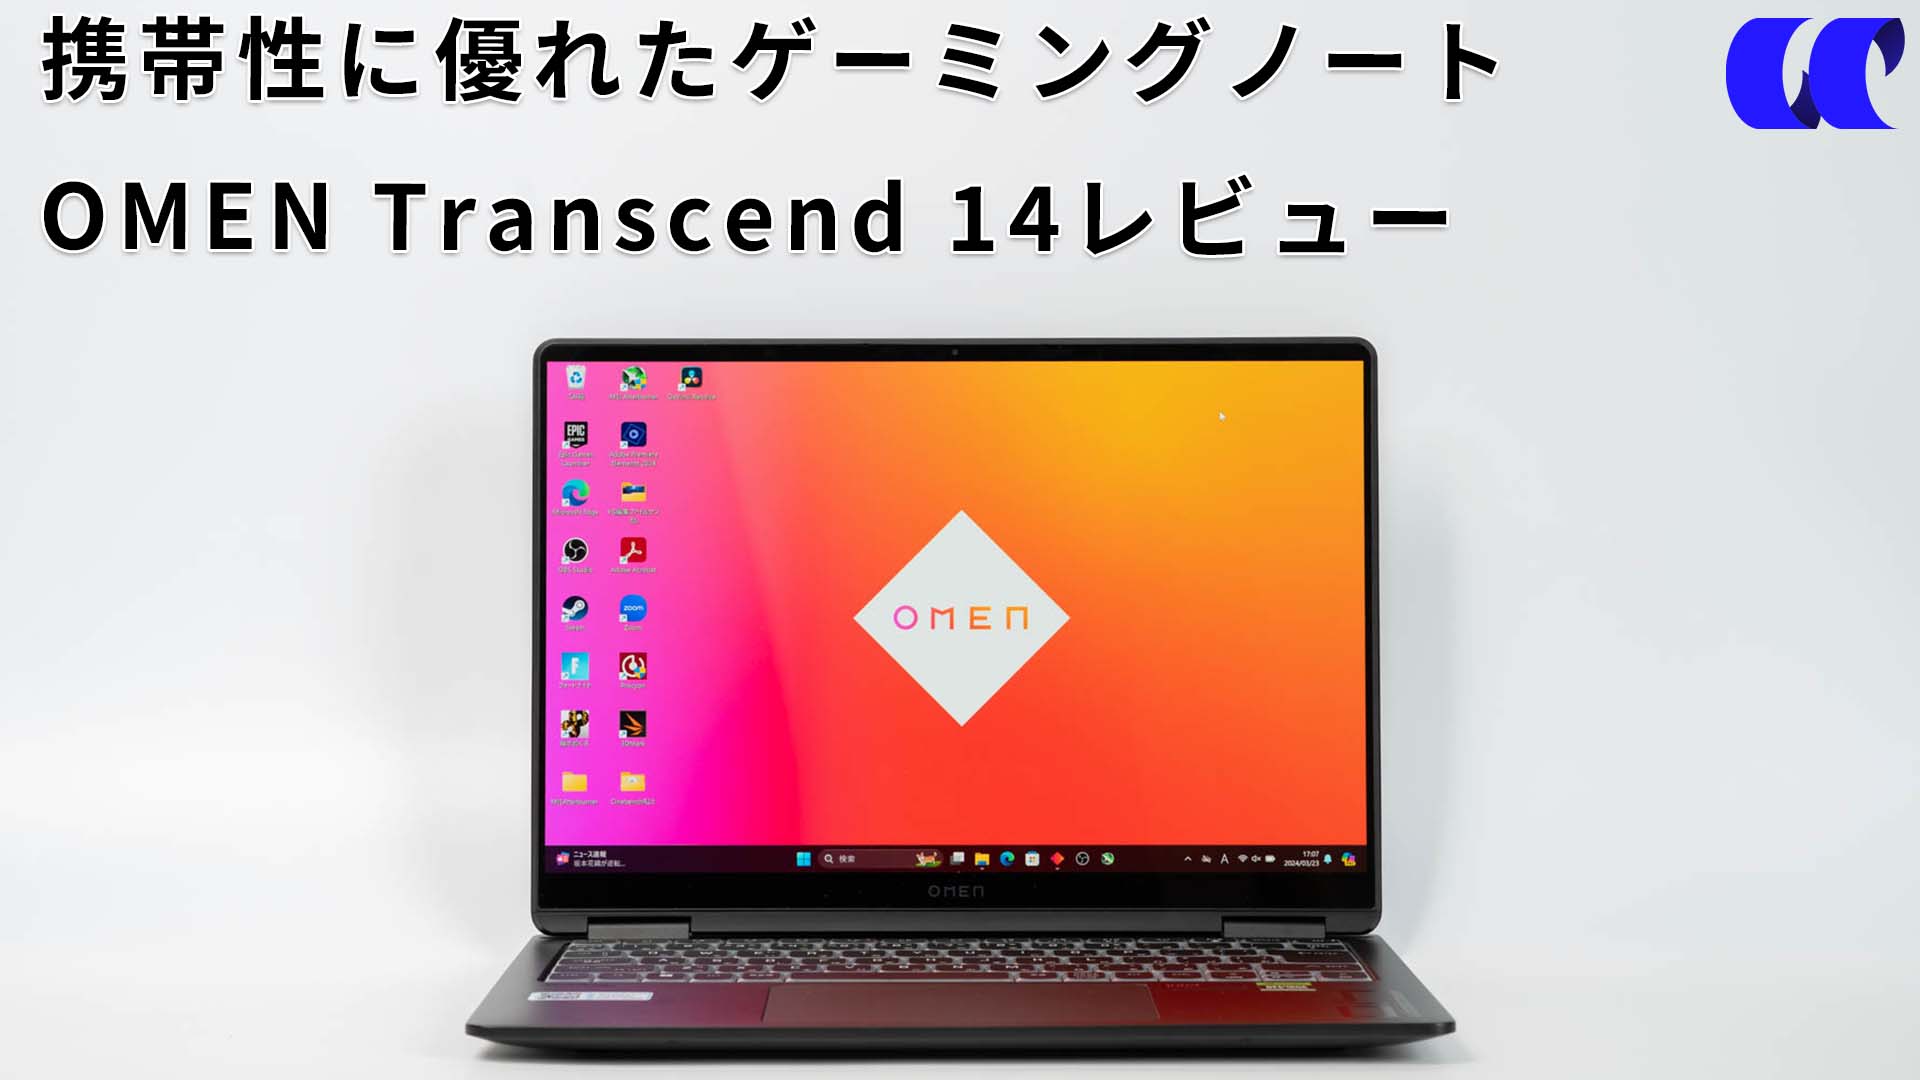 OMEN Transcend 14 is a 14-inch gaming laptop that weighs only 1.6kg |  Usshi Naraifu